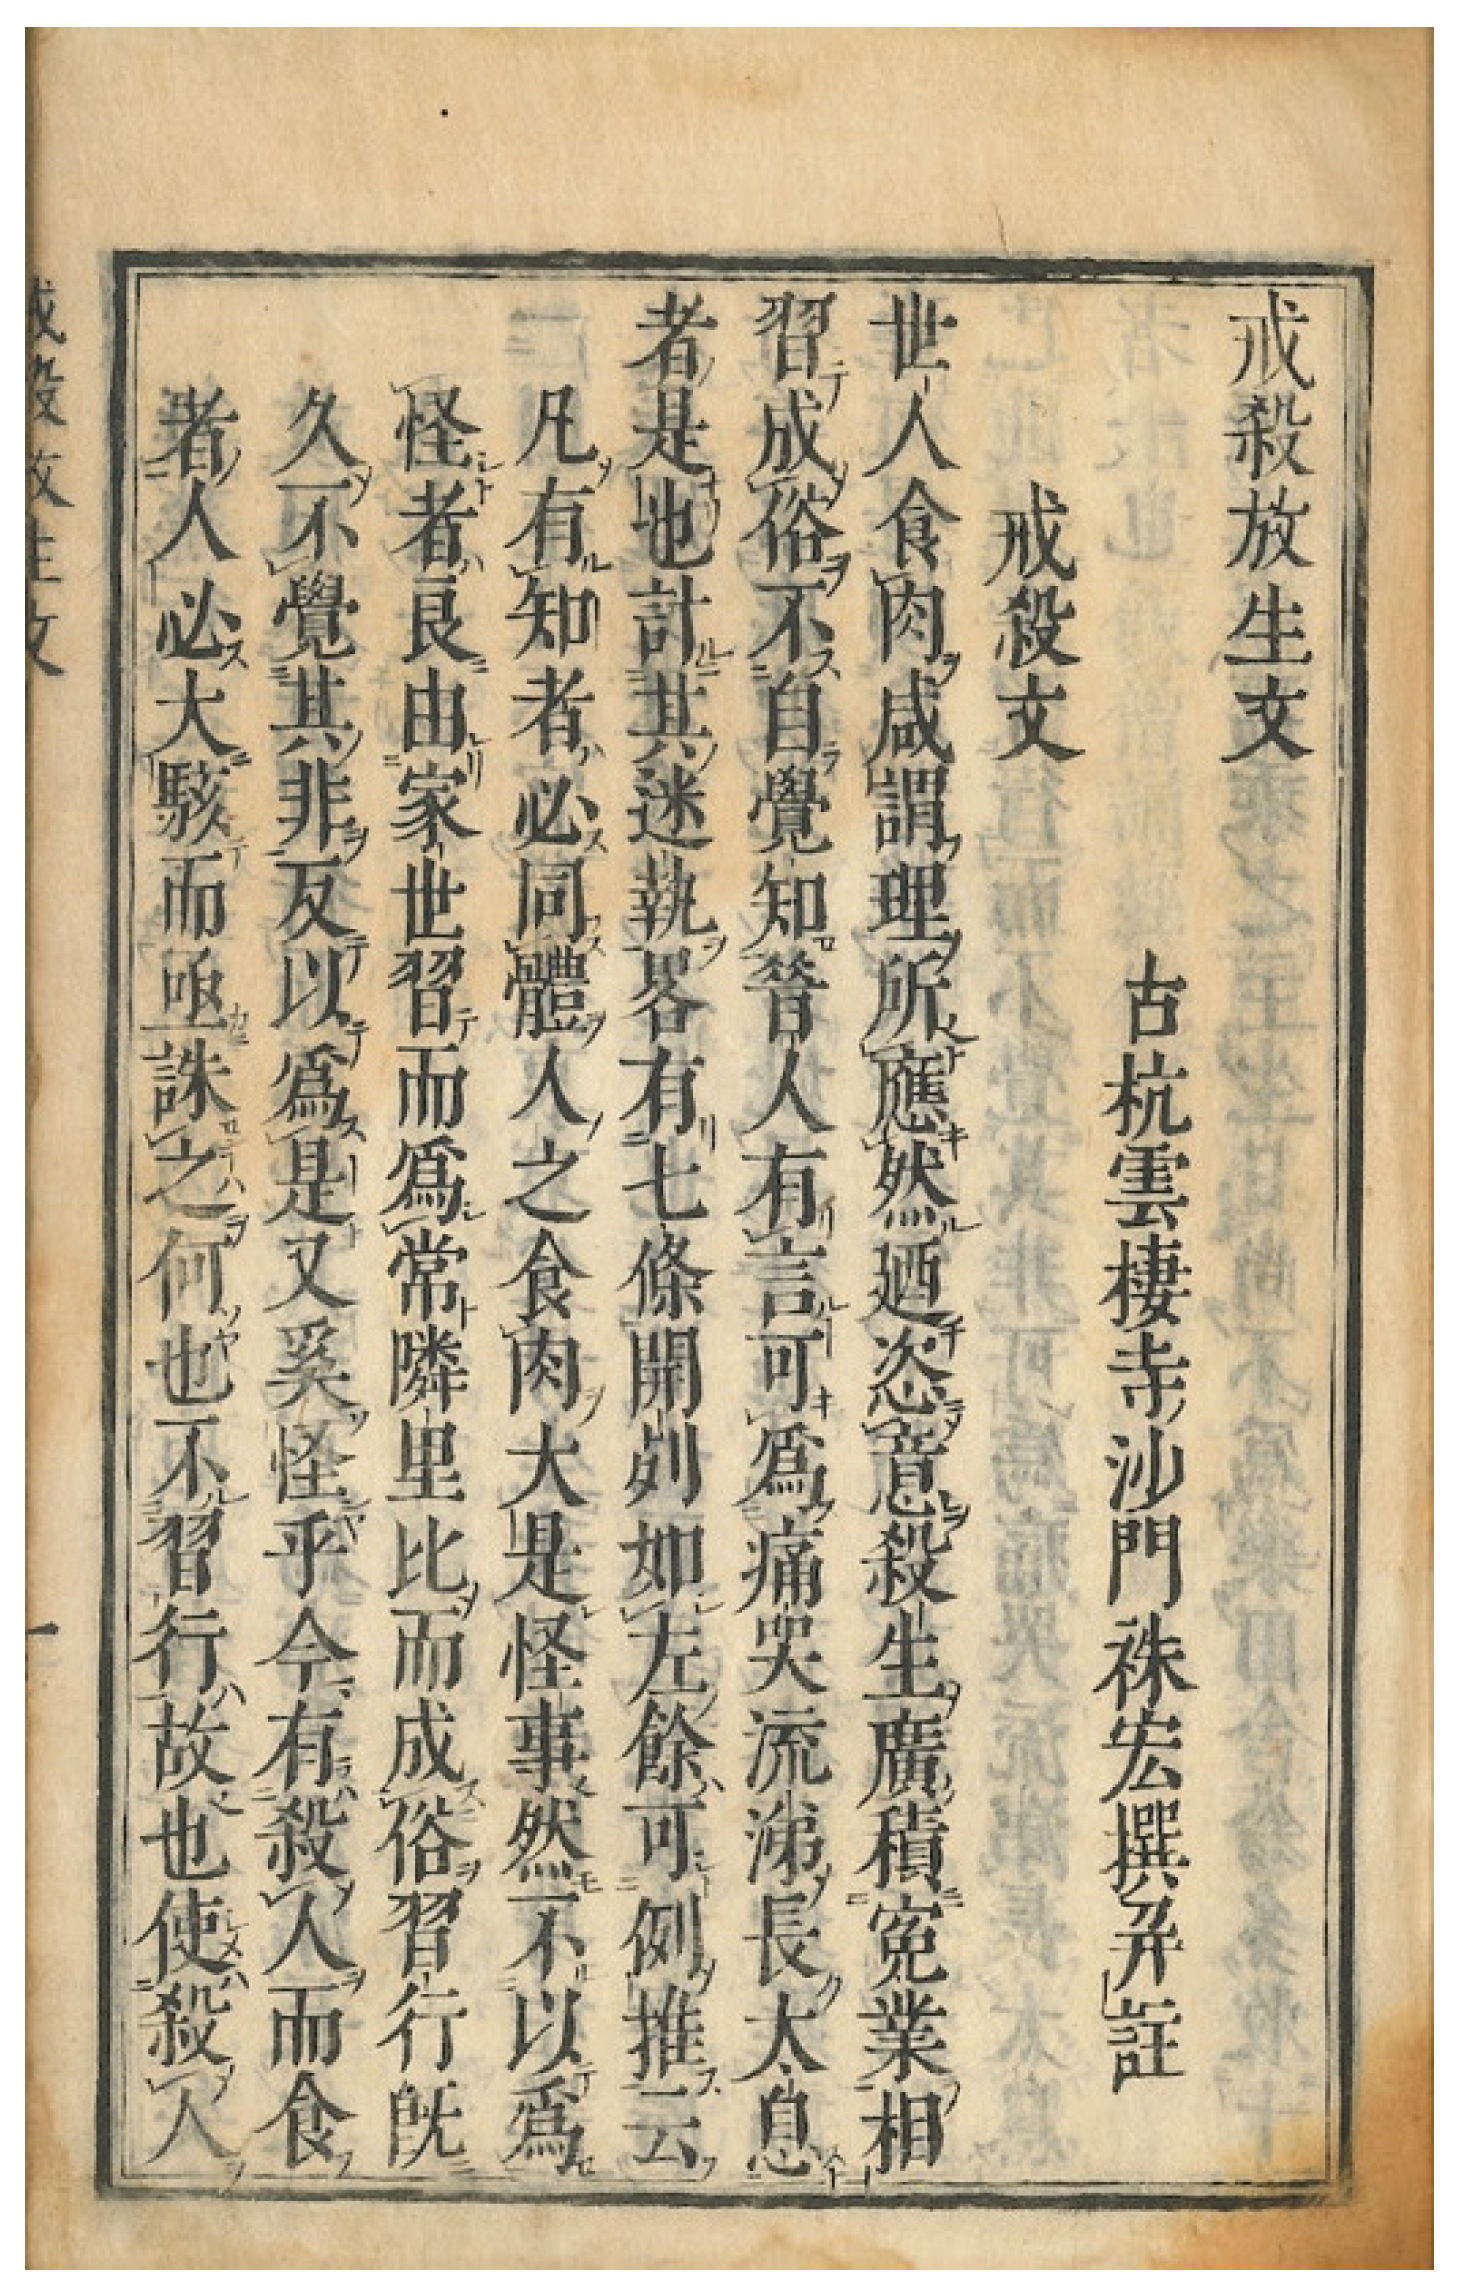 Chinese, Japanese Scholars Donate Ancient Books 